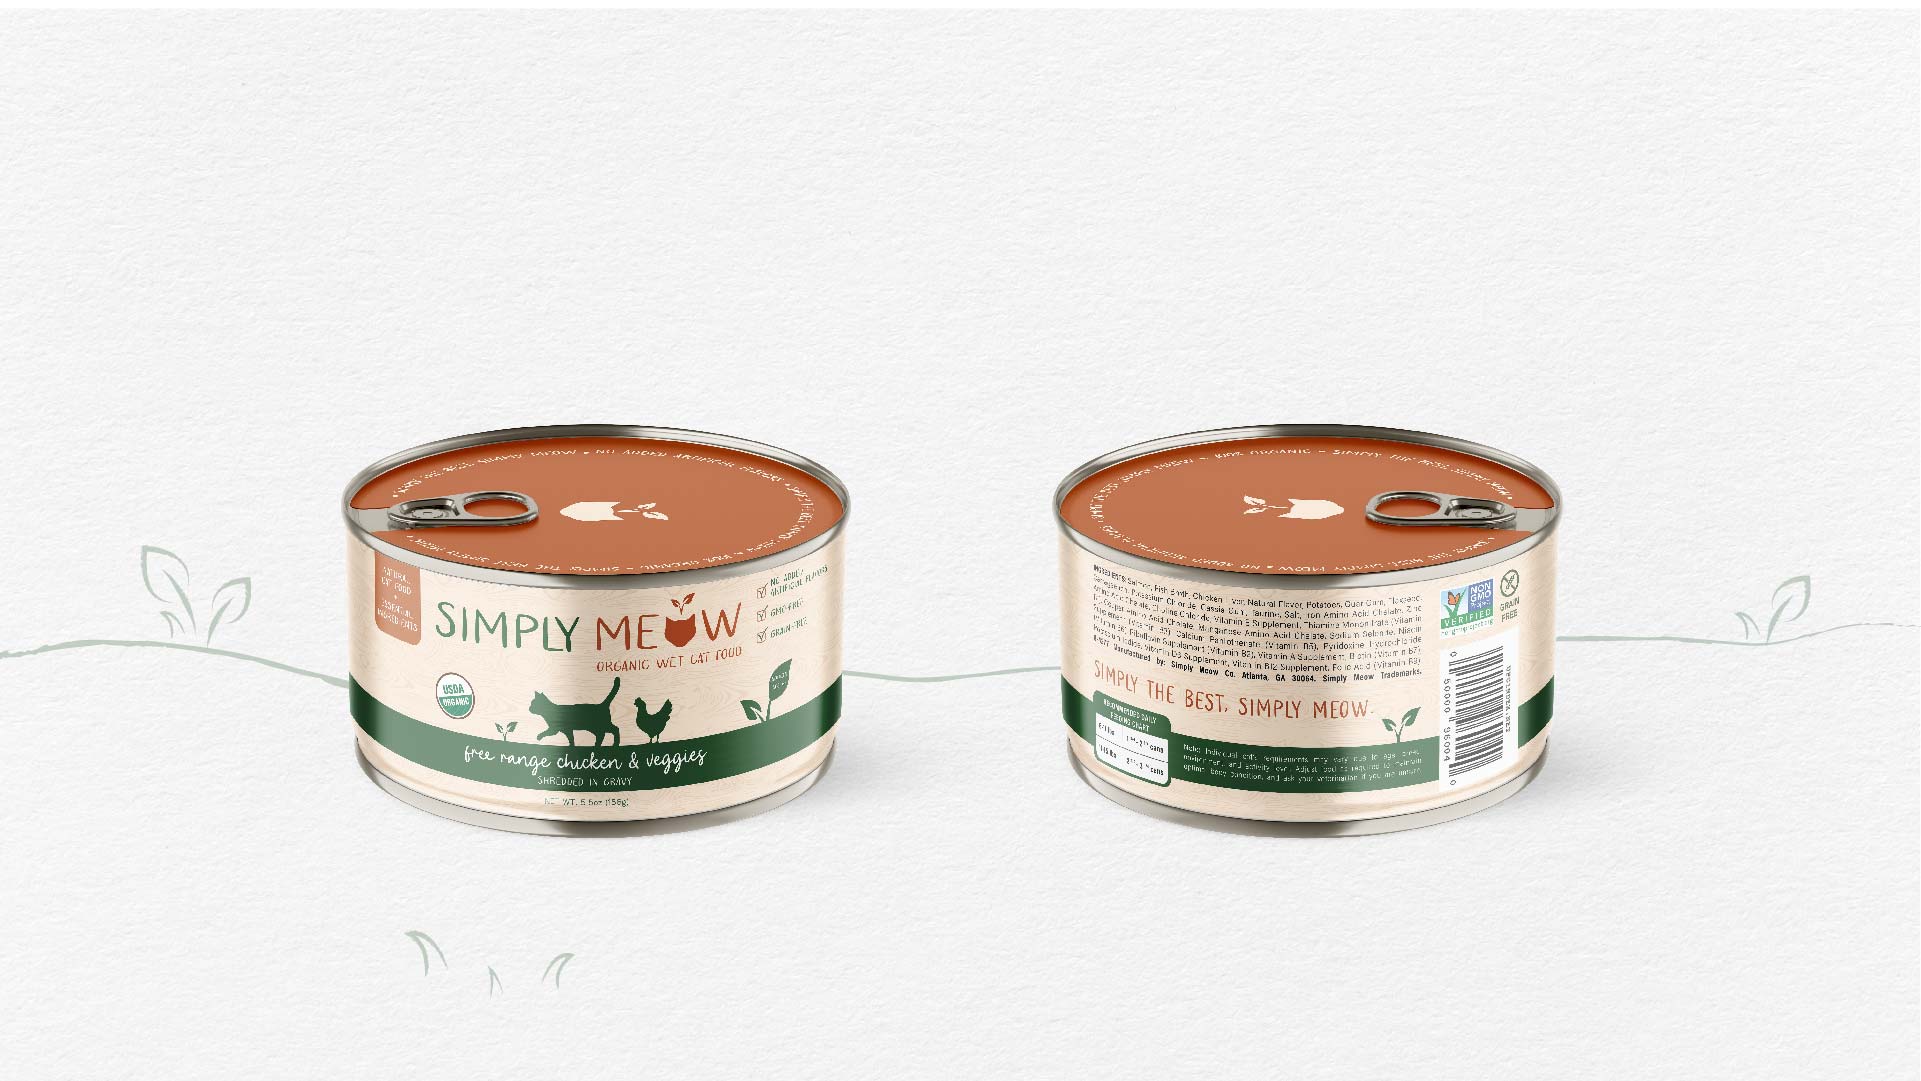 "Simply Meow."  / "Simply Meow." Metal can label 7.5x2 inches, print 2021. Organic cat food brand product design. This warm and inviting color palette paired with simple visuals conveys a healthy brand worthy of your feline friends.